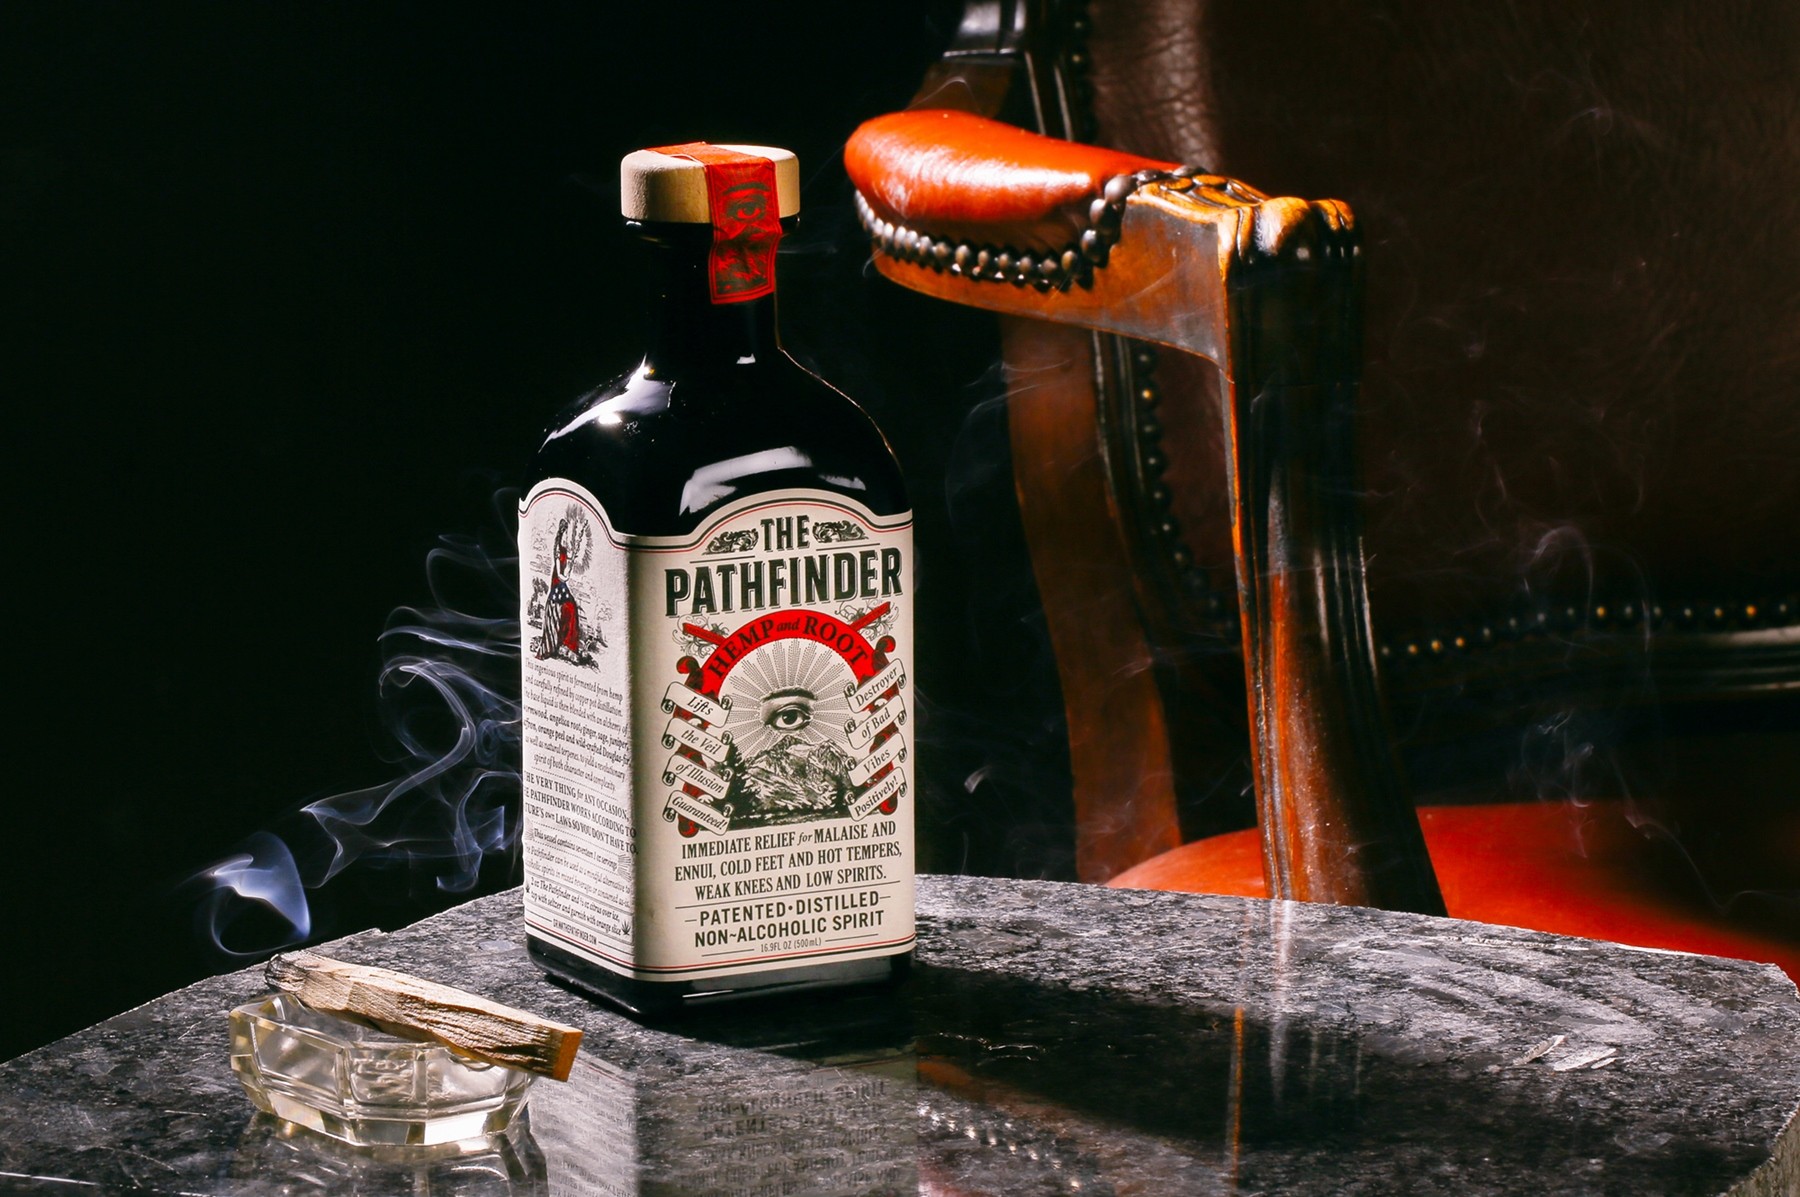 The Pathfinder: The Hemp-Infused, Distilled Non-Alcoholic Spirit